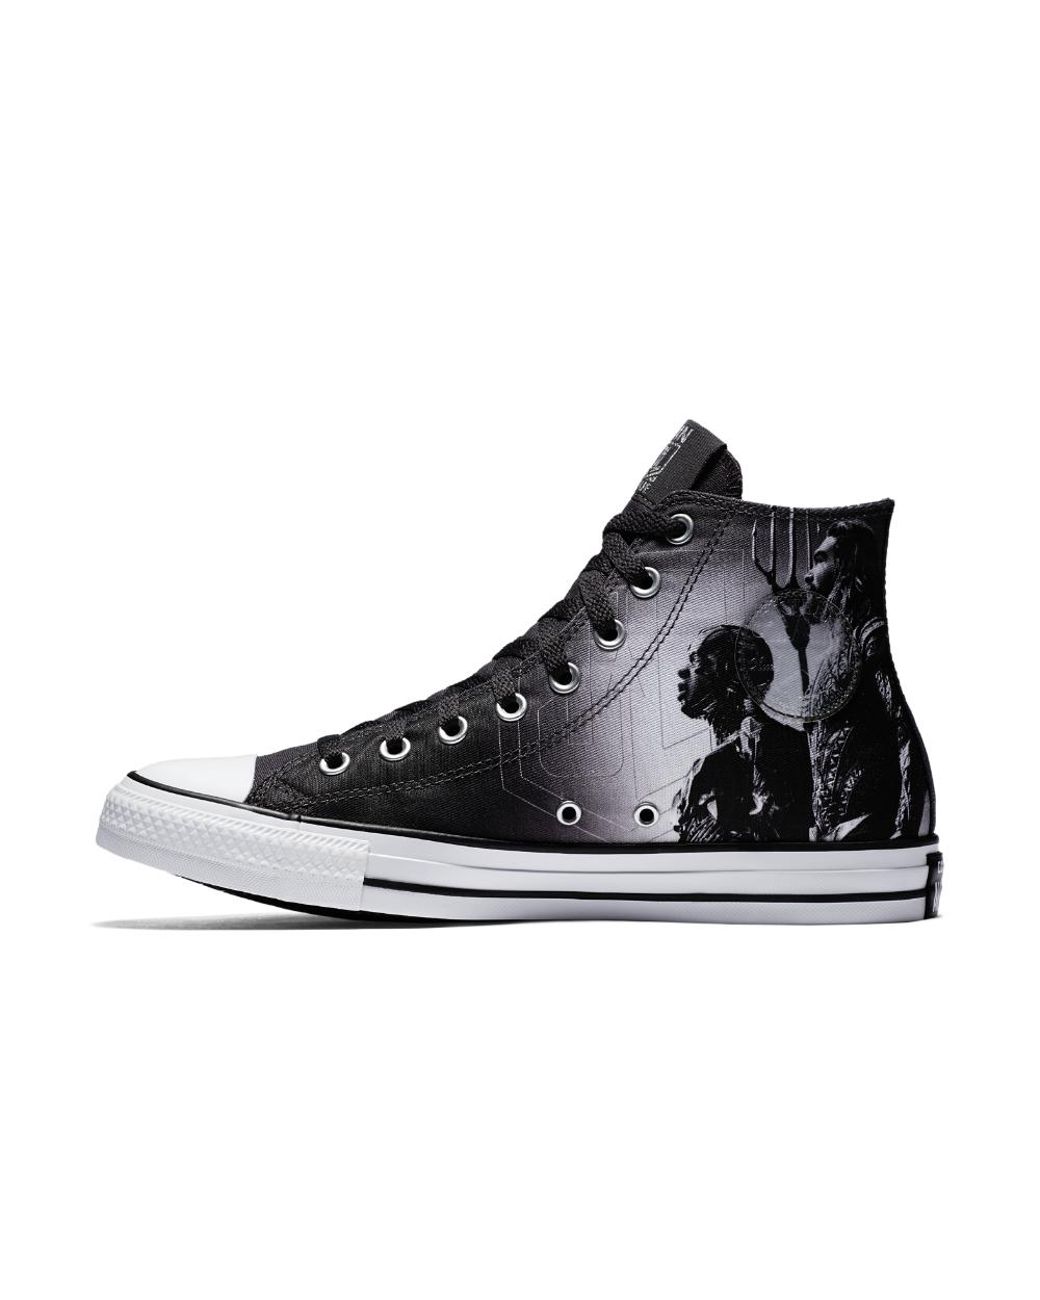 Converse Chuck Taylor All Star Dc Comics Justice League High Top Shoe in  Black | Lyst